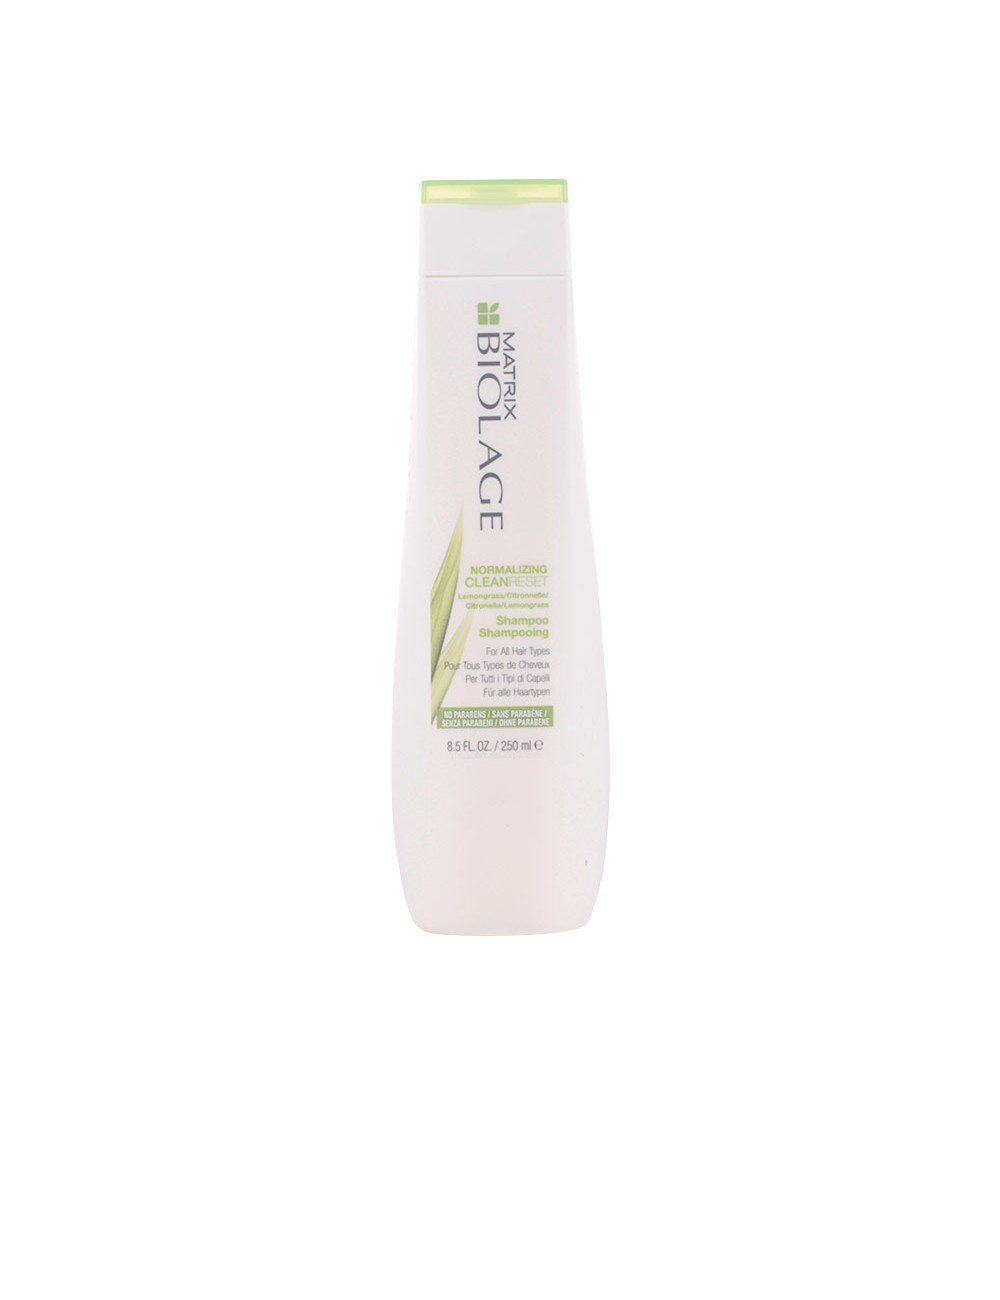 CLEAN RESET normalizing shampoo